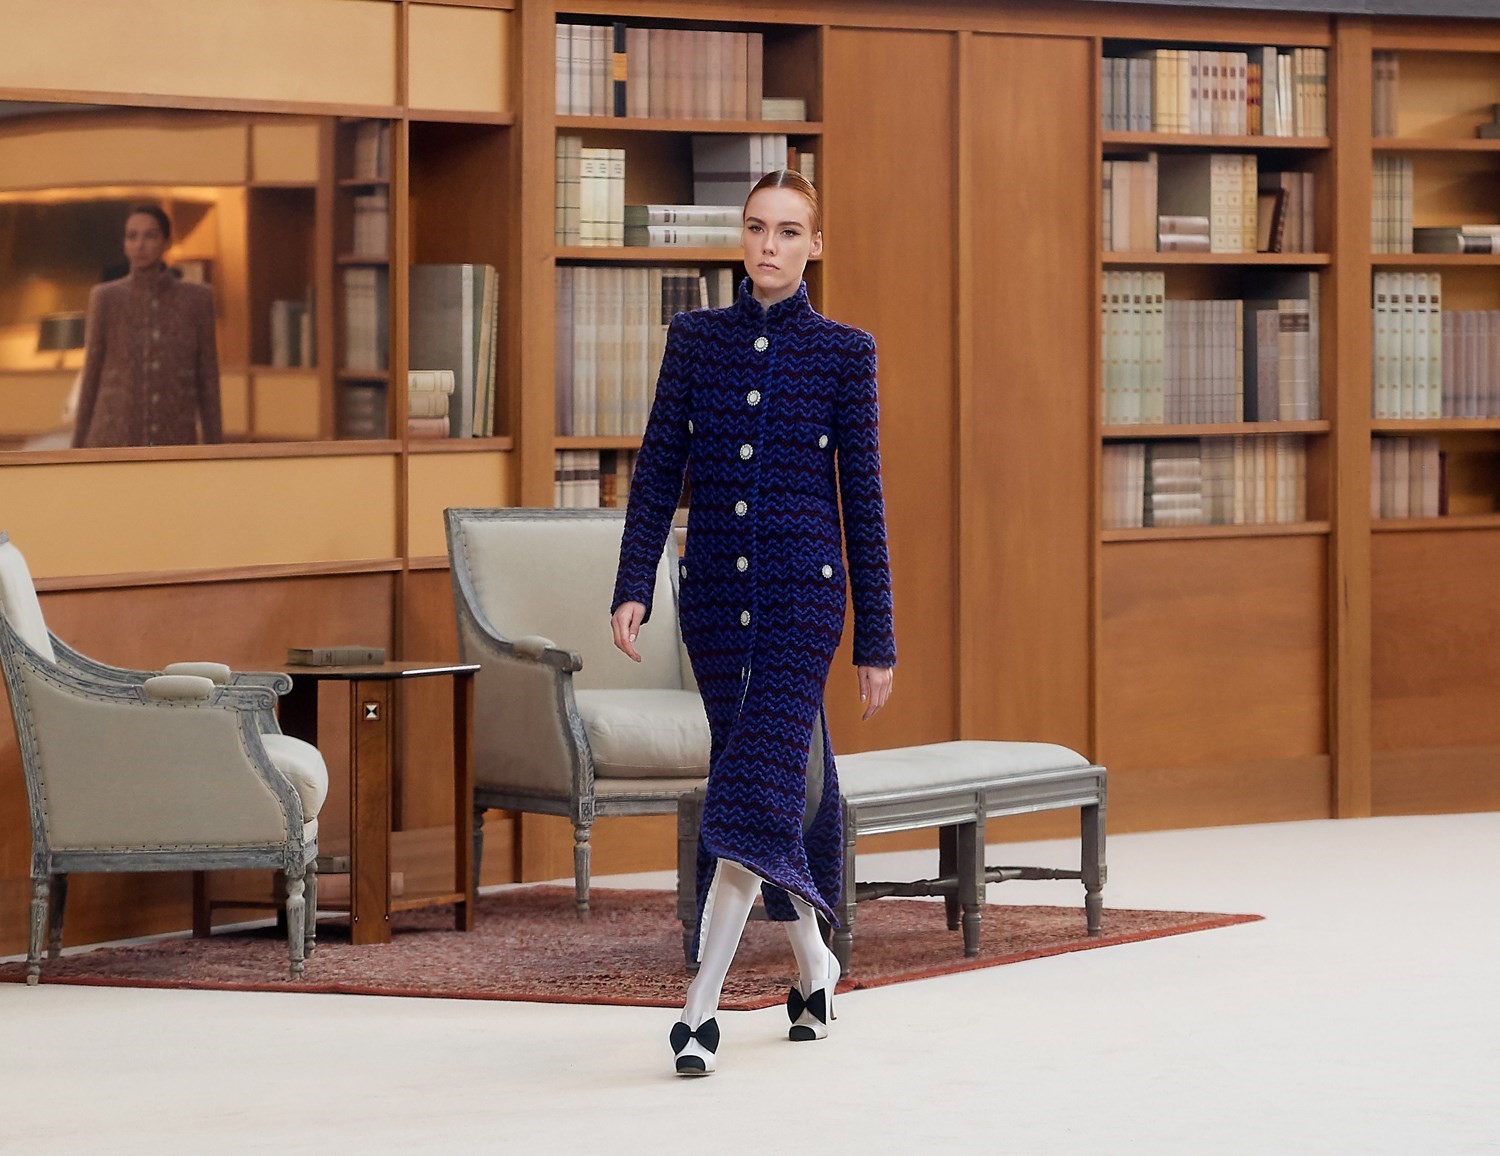 Alexander Fury: Virginie Viard Makes Her Chanel Couture Debut | AnOther